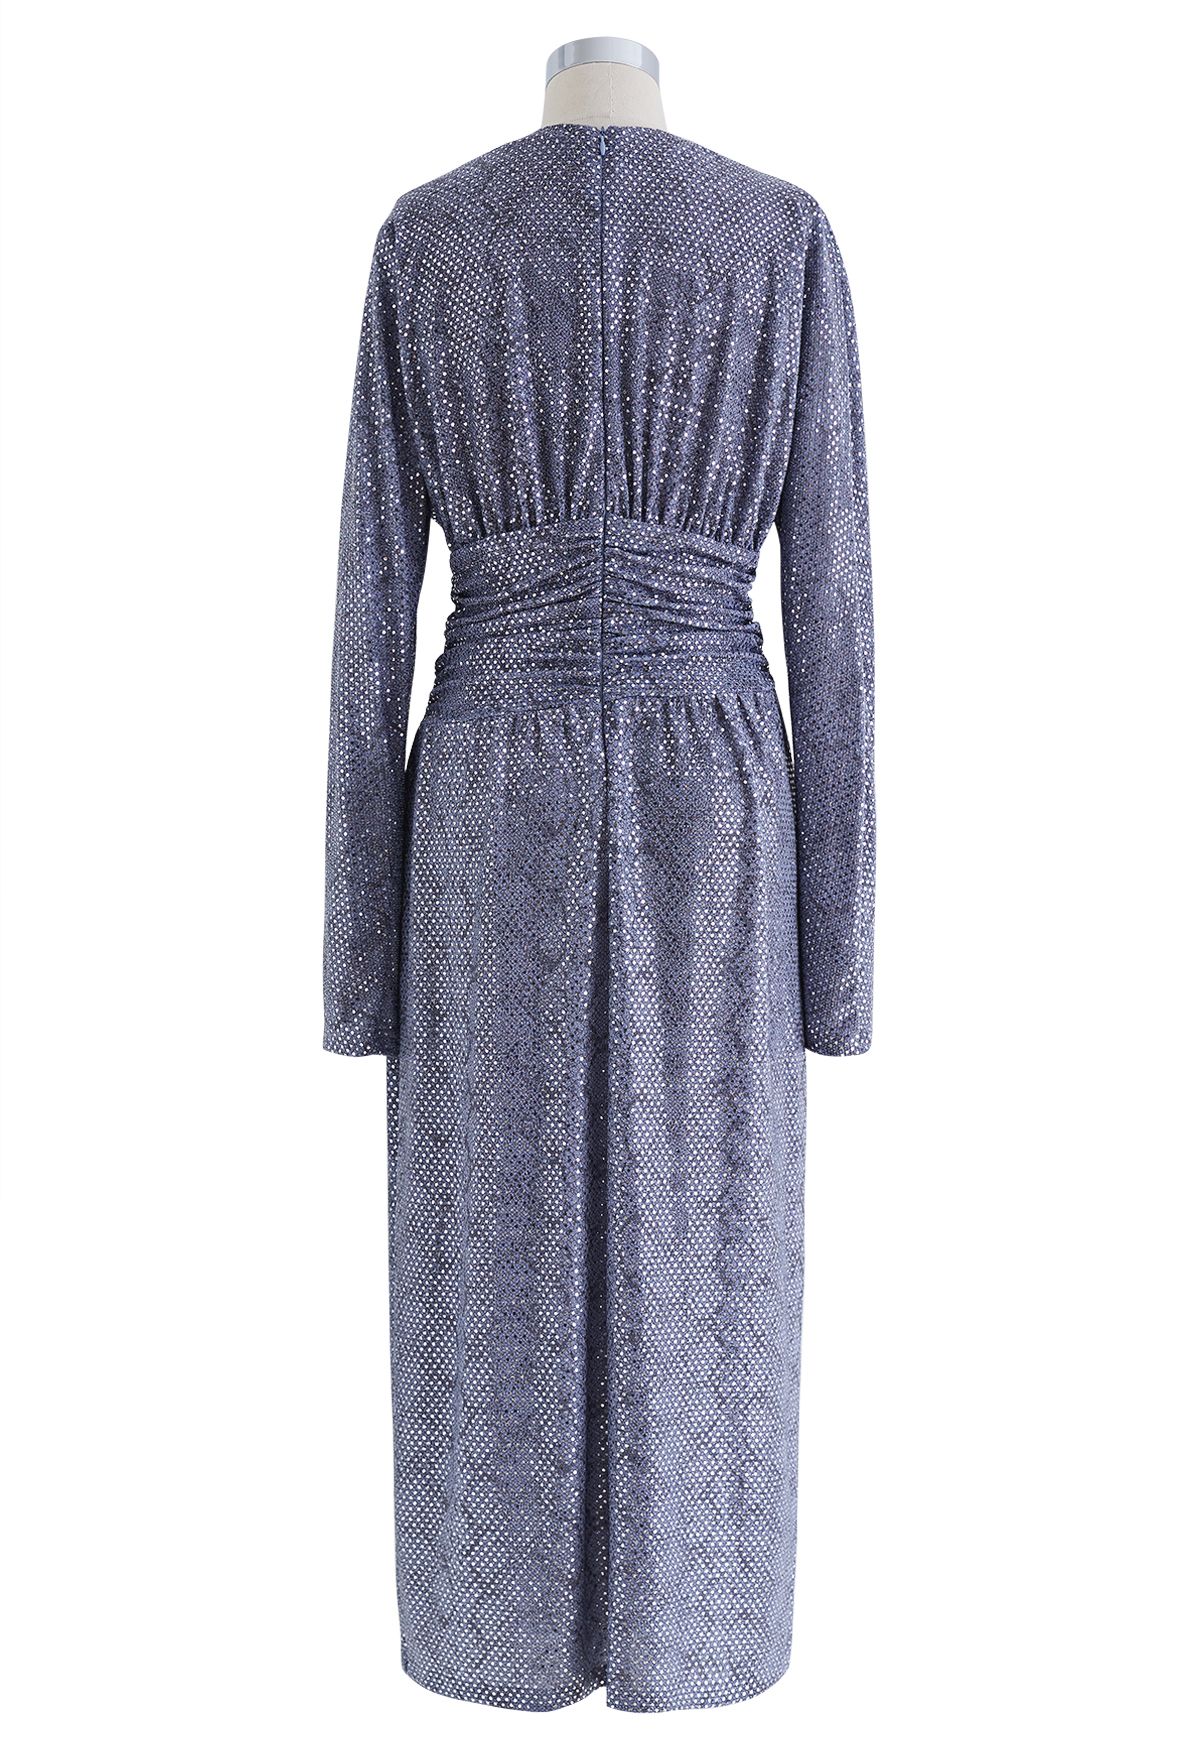 Sequined Snake Print Wrapped Slit Dress in Dusty Blue - Retro, Indie ...